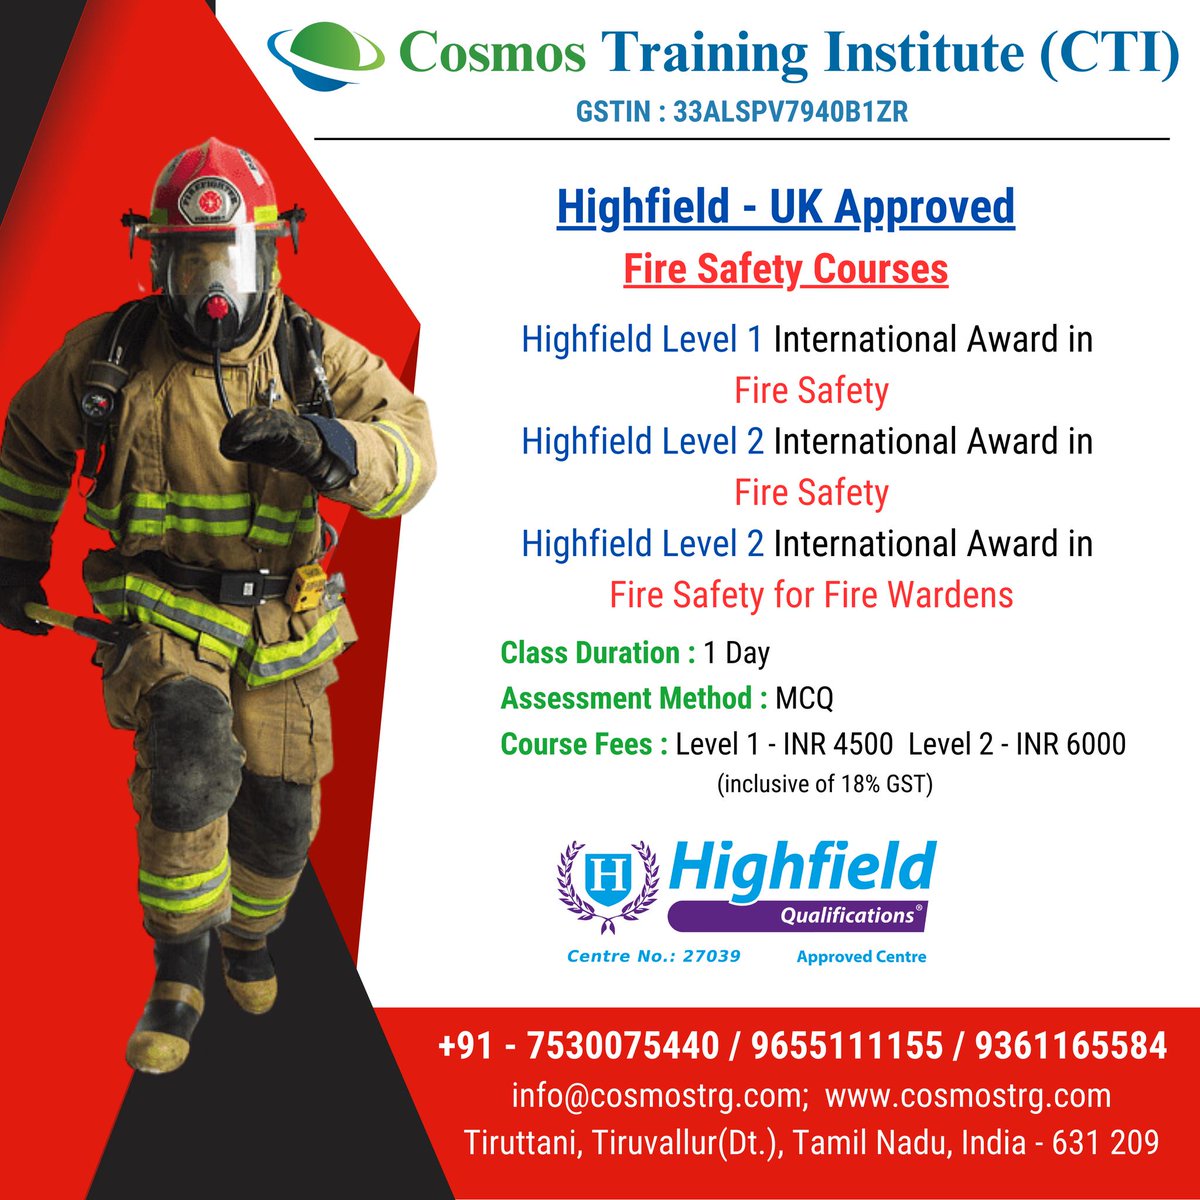 #auditingtheory #firstaidkit #accident #incident #investigation #investigation #fireprotection #fireguarde #coshhcertified #COSHHTraining #AuditingServices #auditing #incidentinvestigatin #accidentinvestigation #teachingcourses #teachingjobs #trainingcourse #teachingcourses